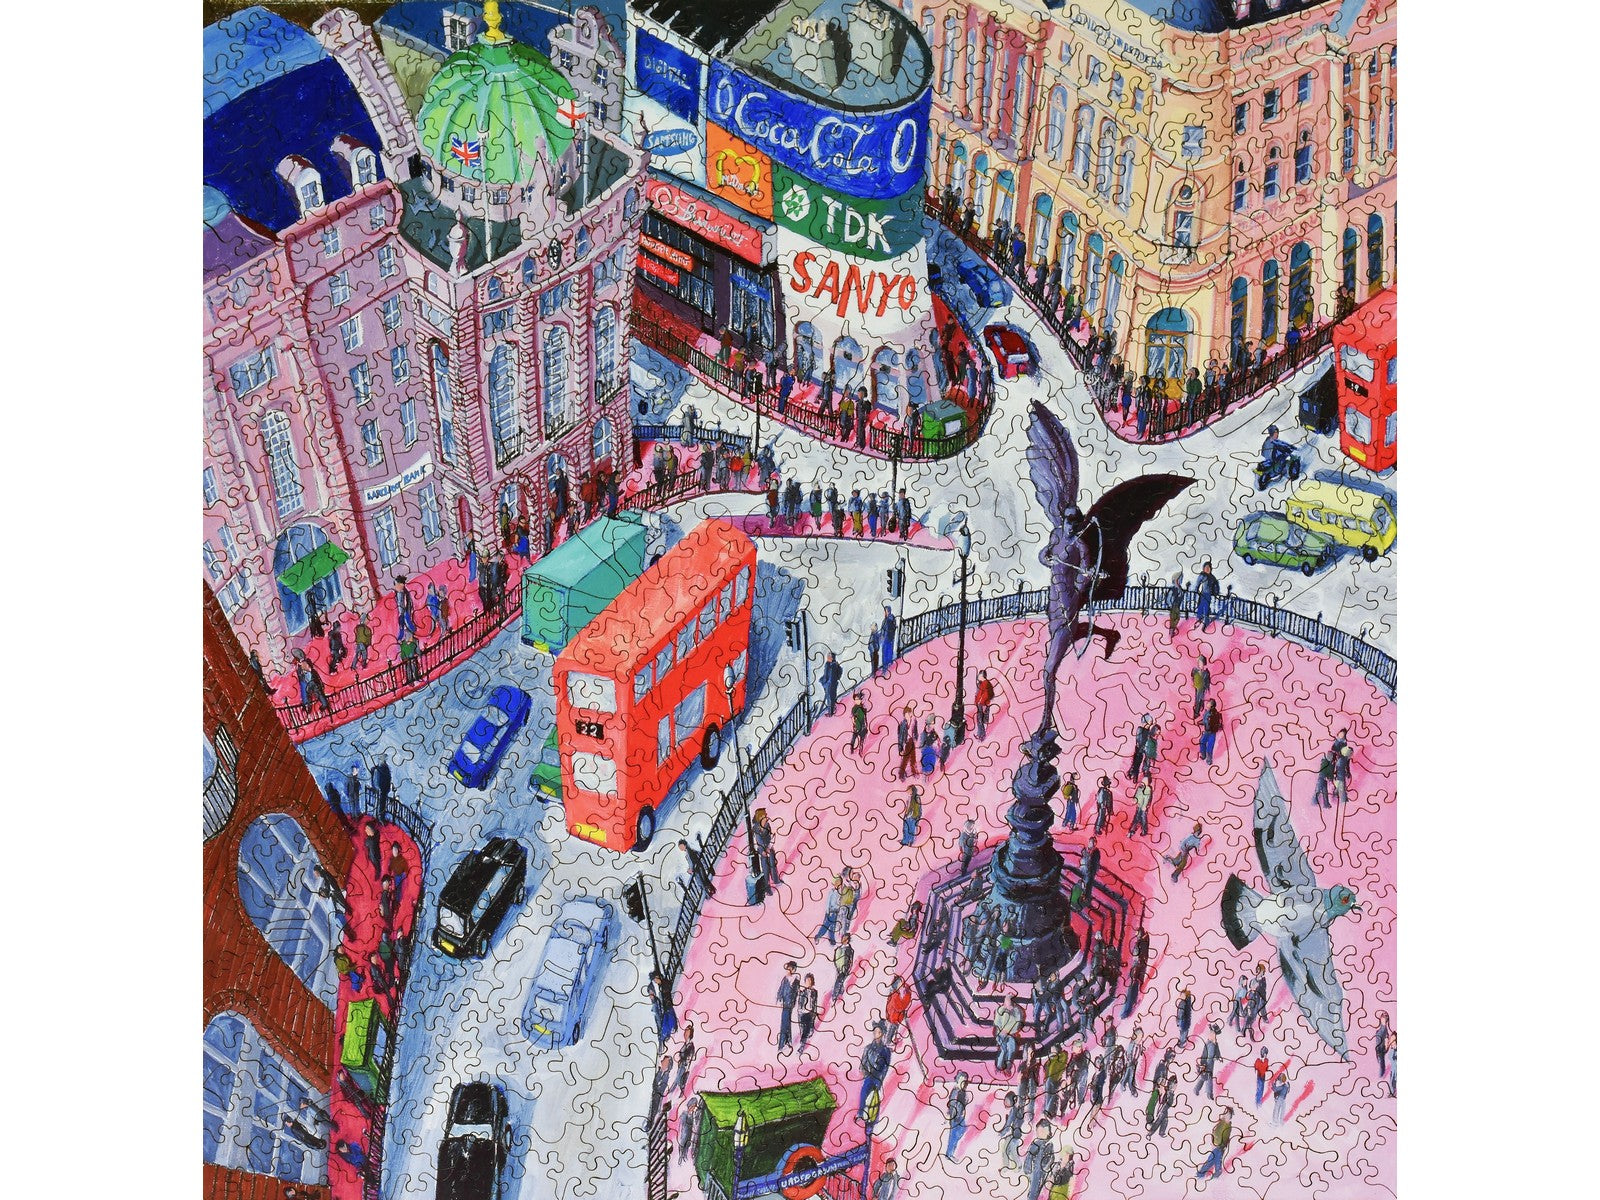 The front of the puzzle, Piccadilly Circus, which shows a busy city square in London.